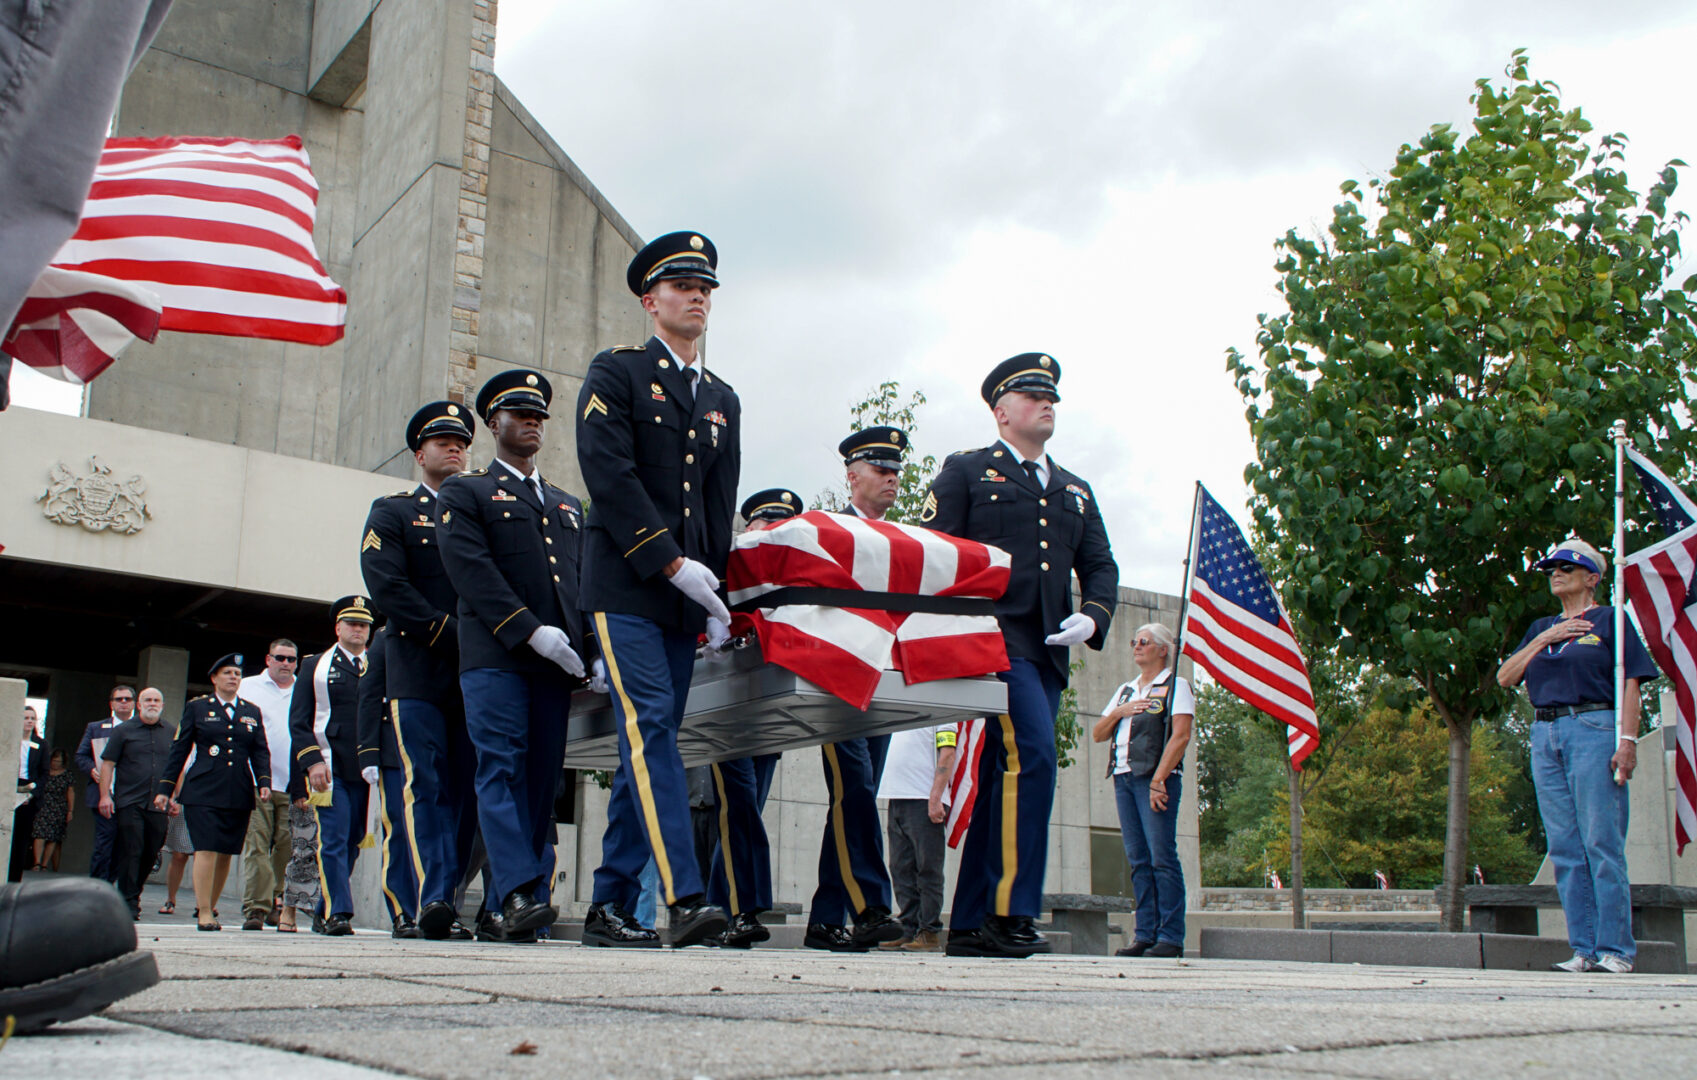 Members of the Pennsylvania Army National GuardPennsylvania Army National Guard Honor Guard carry the casket of U.S. Army Private First Class Donald Born who went missing during the Korean War but was recently identified. He was laid to rest at Indiantown Gap National Cemetery on Aug. 30, 2022. (Jeremy Long/WITF)